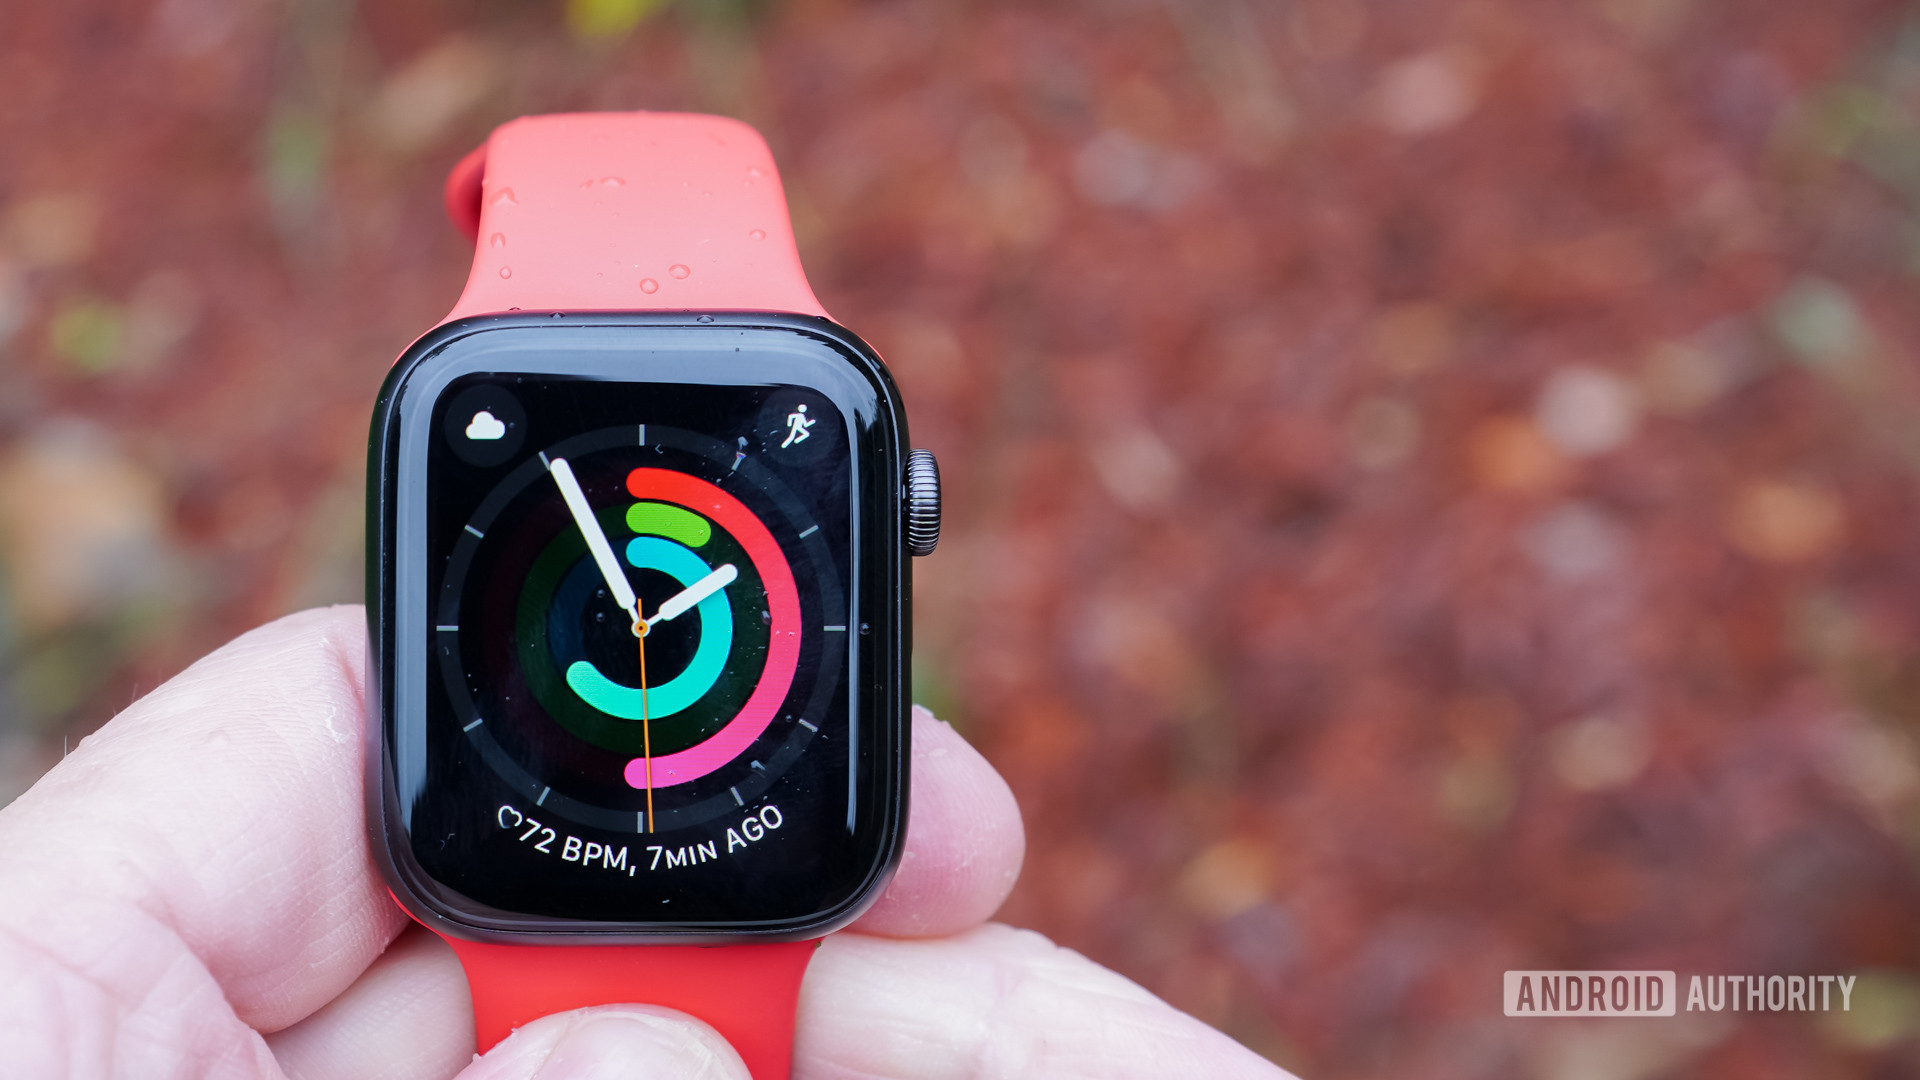 The Best Prime Day Smartwatch Deals on Apple Watch, Galaxy Watch, More